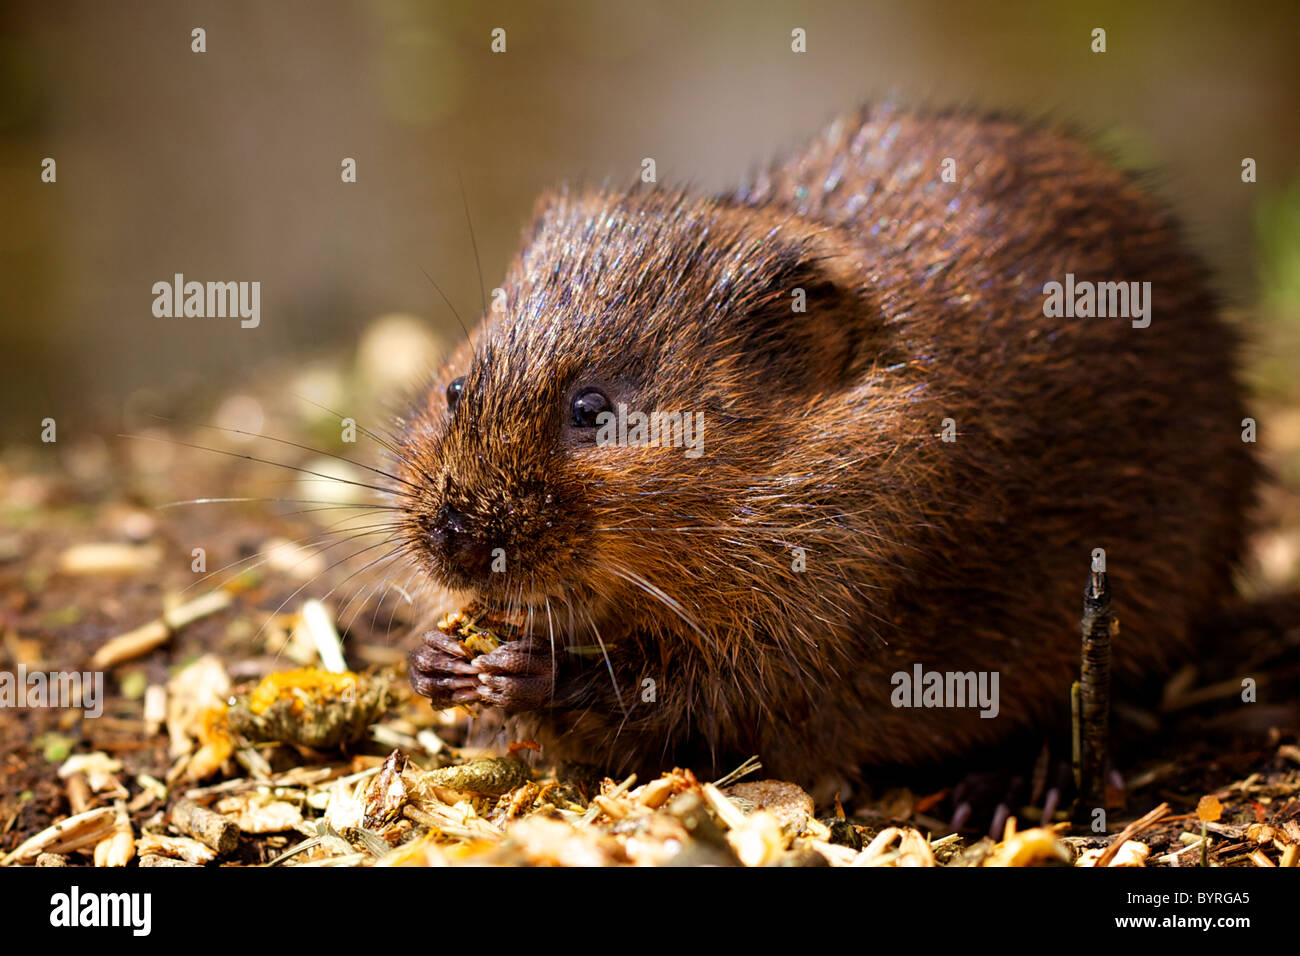 A small water vole eating Stock Photo